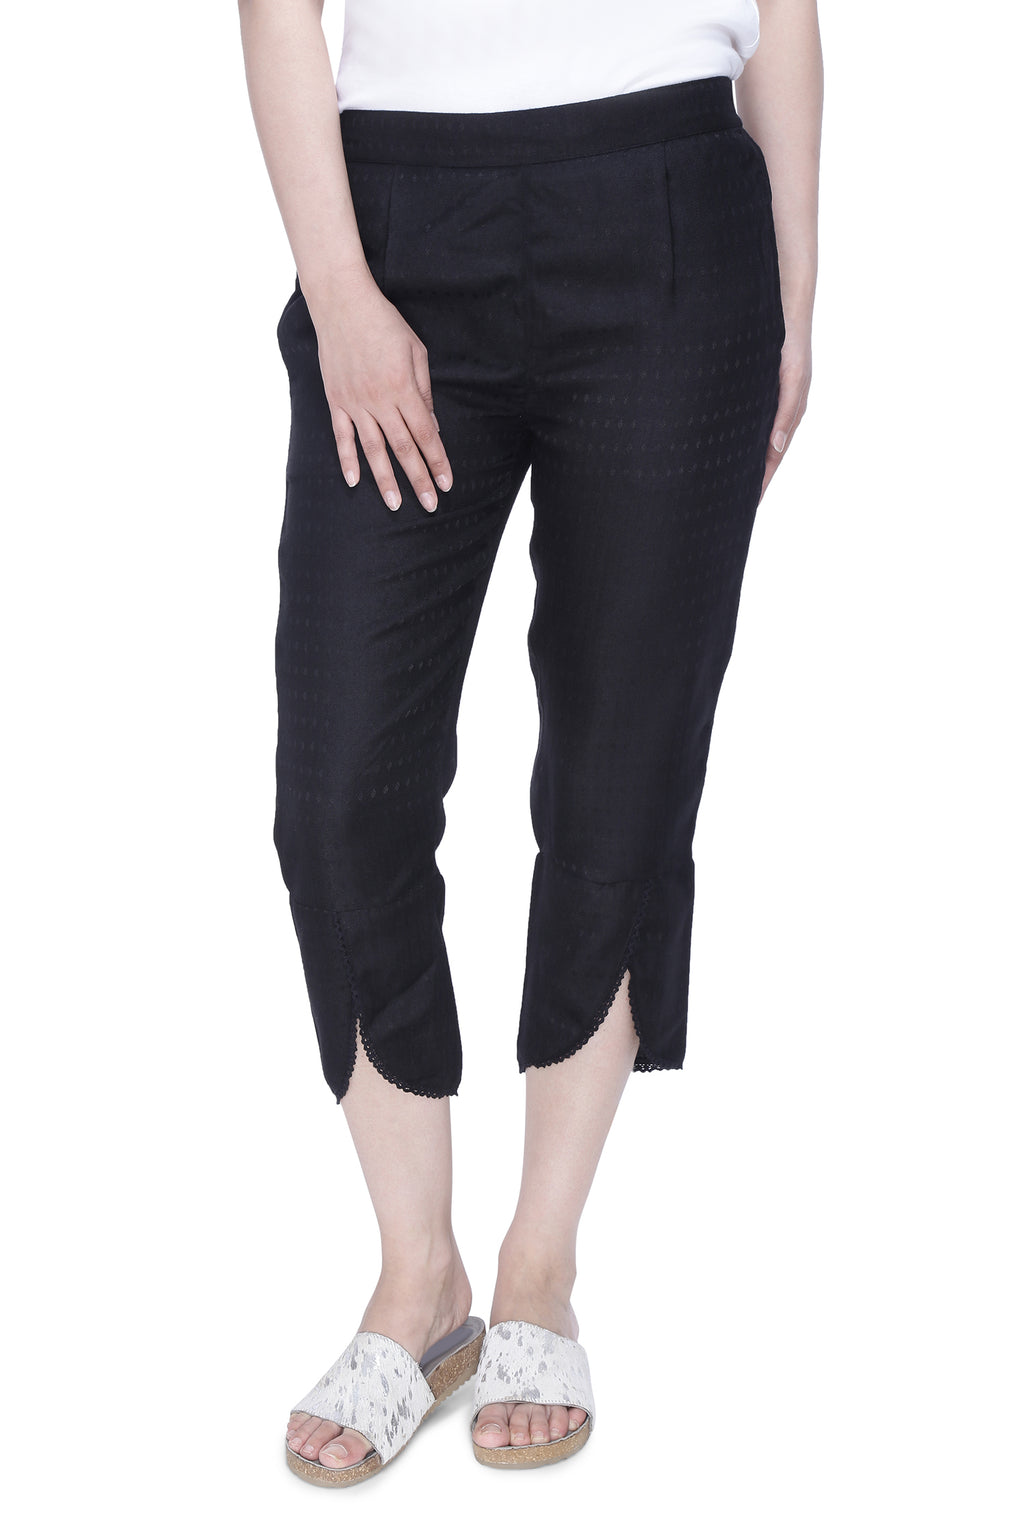 Buy hakoba pants in India @ Limeroad | page 3